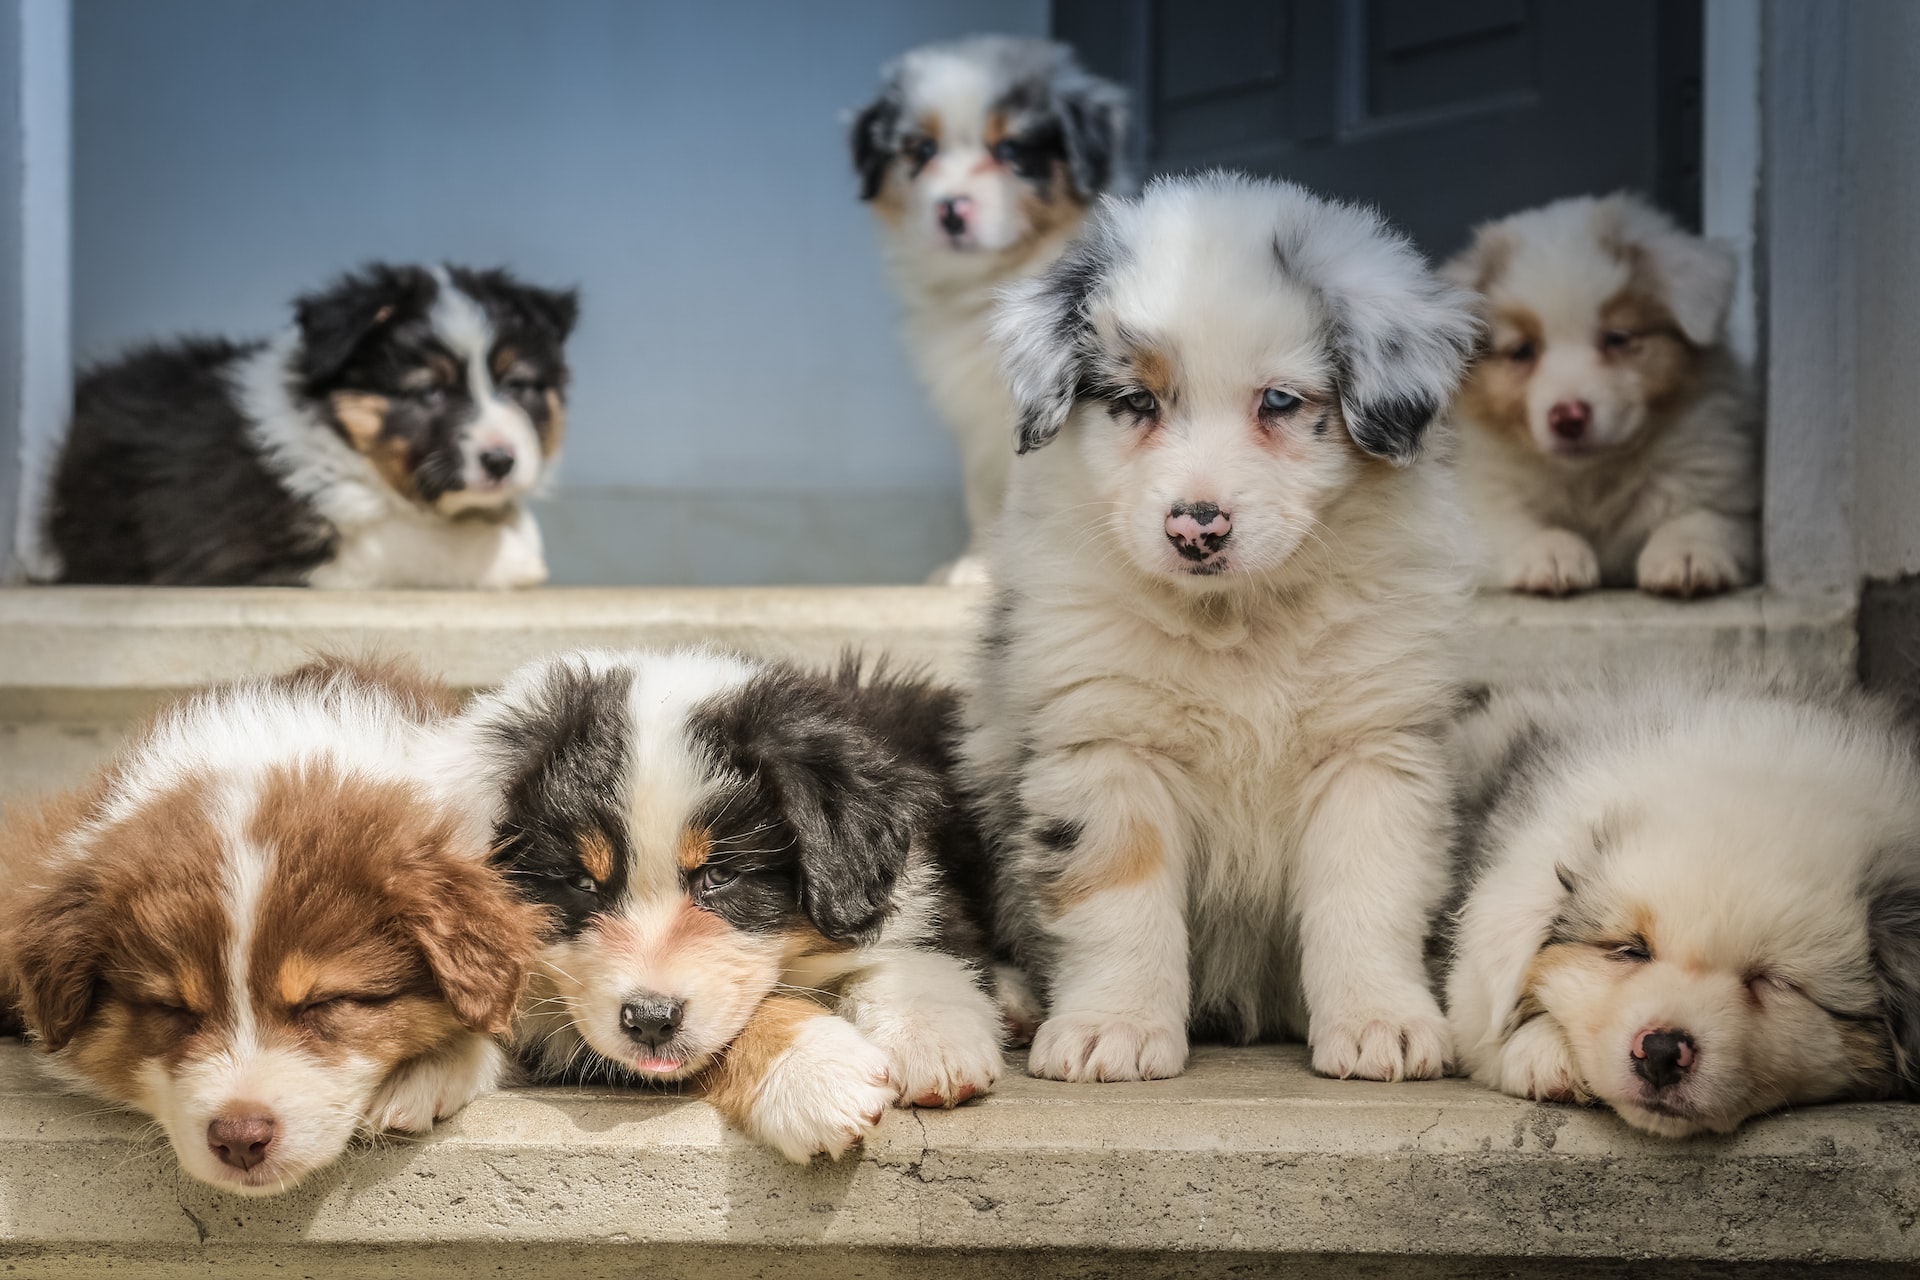 5 Important Ways You Can Protect Your Pets at Home